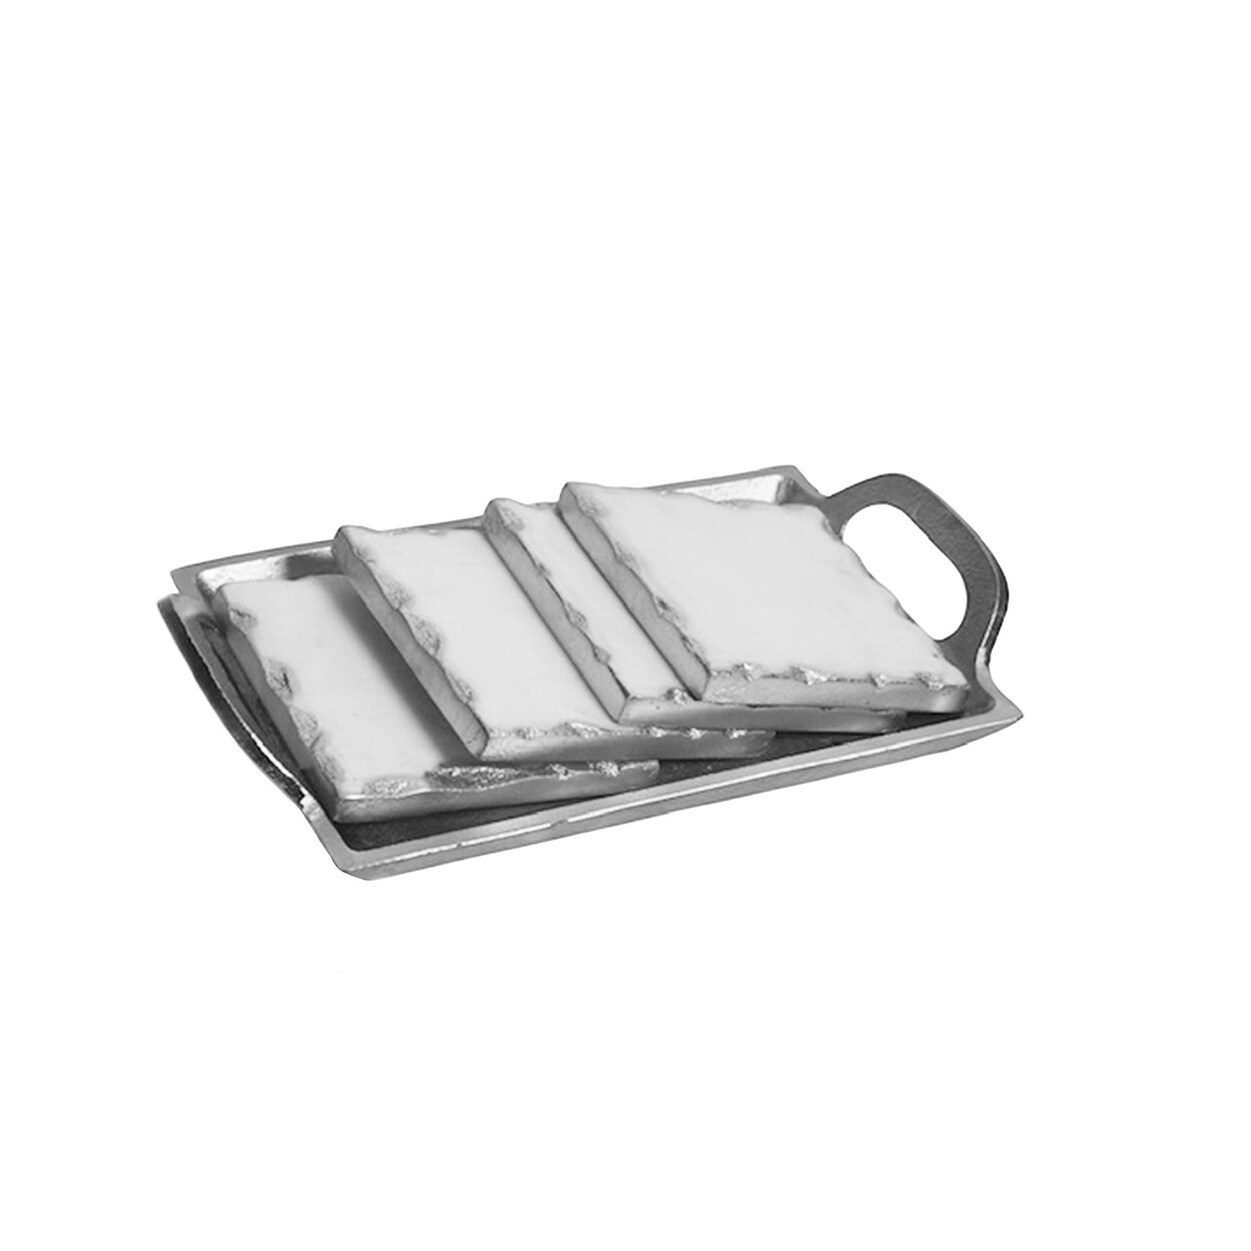 Set of 4 Marble Coasters with Tray - Silver